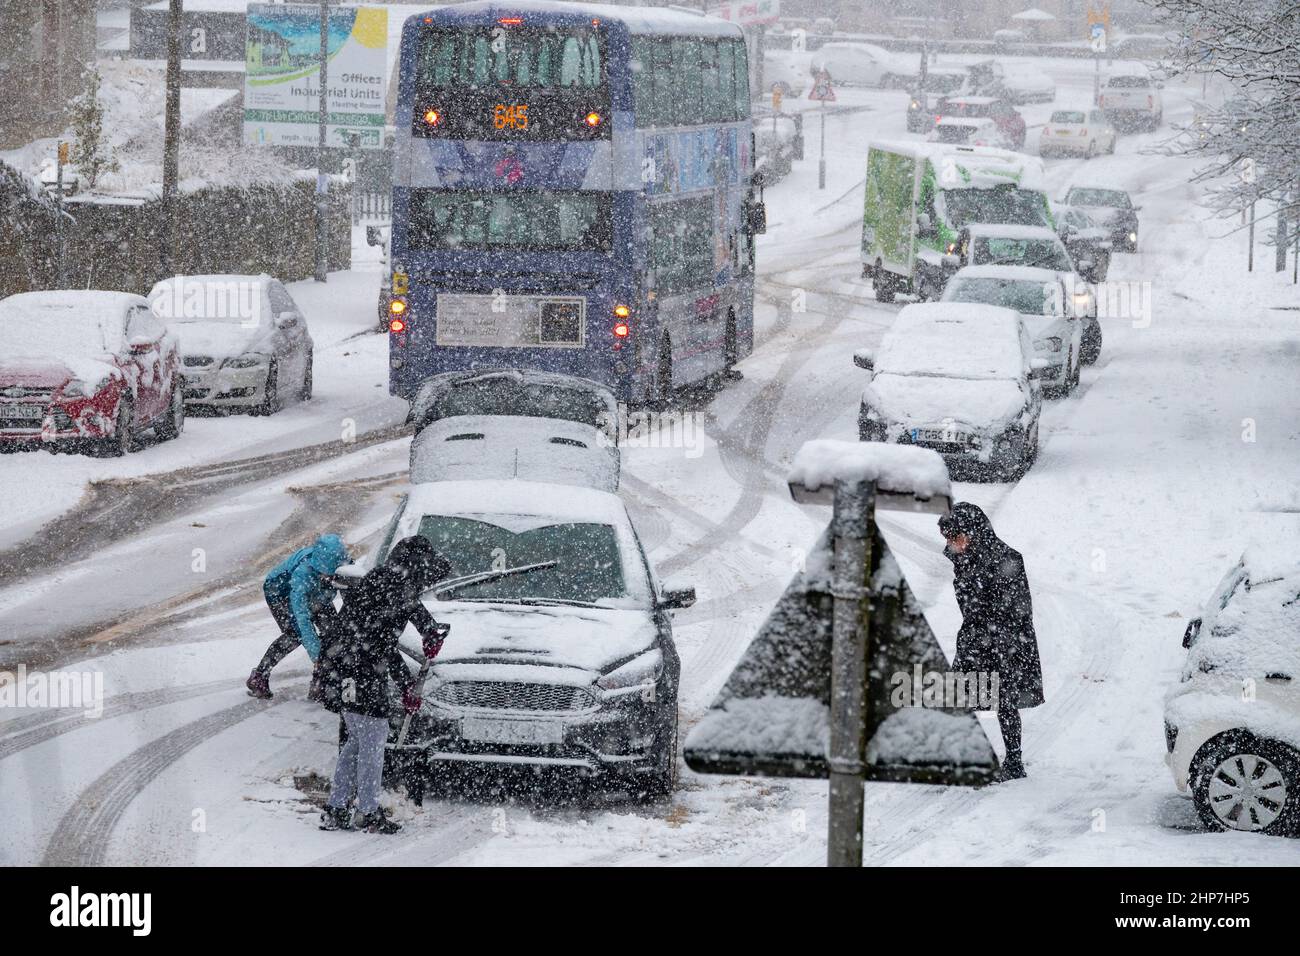 Snow and ice causing disruption on the hills around Bradford, West Yorkshire, UK. 19th Feb 2022. Cars struggle to move on slippery winter surfaces. Women try to clear wheels on snowy hill to get their car moving. Stock Photo